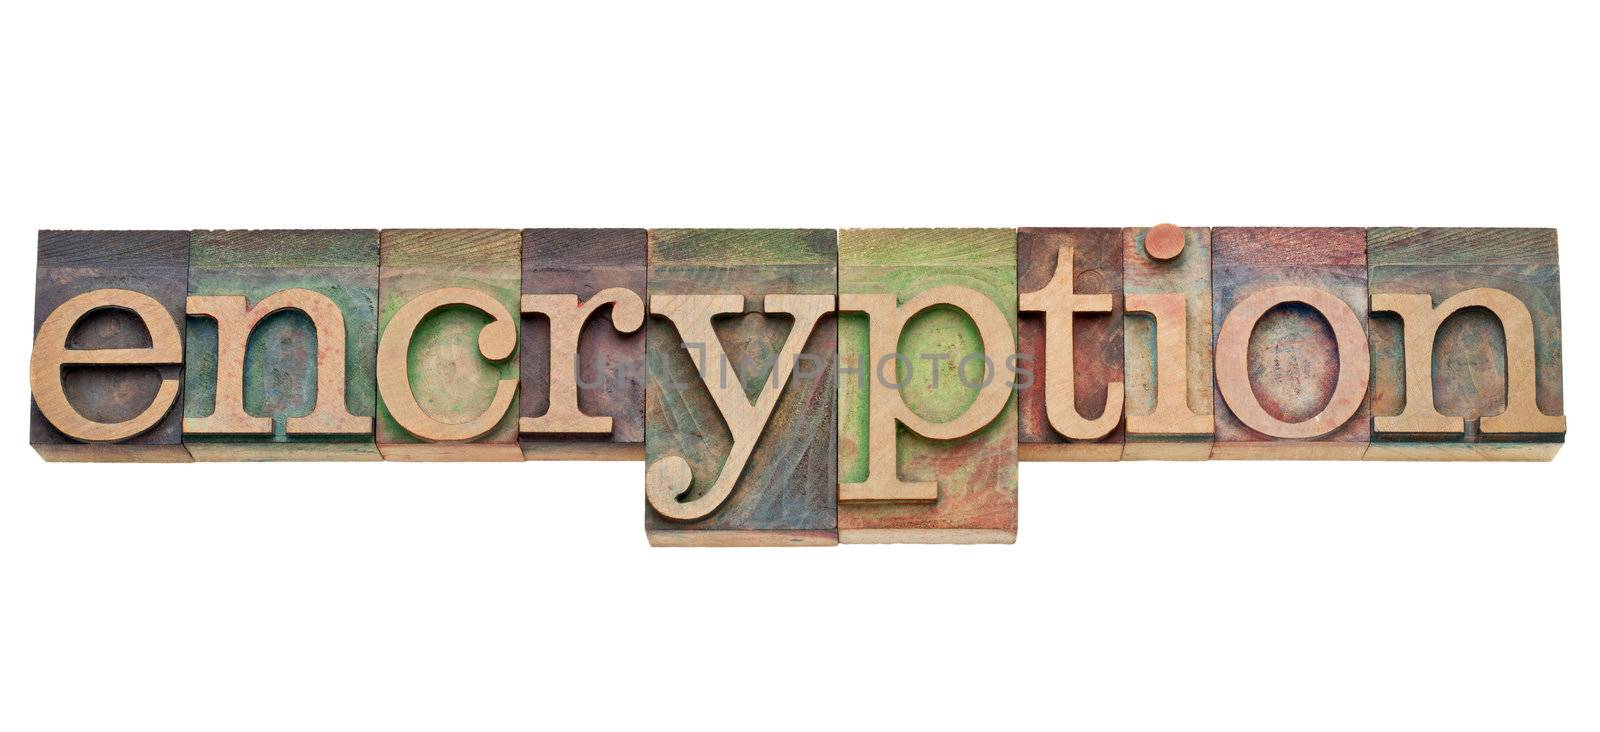 encryption - computer network security concept - isolated text in vintage wood letterpress printing blocks, stained by color inks